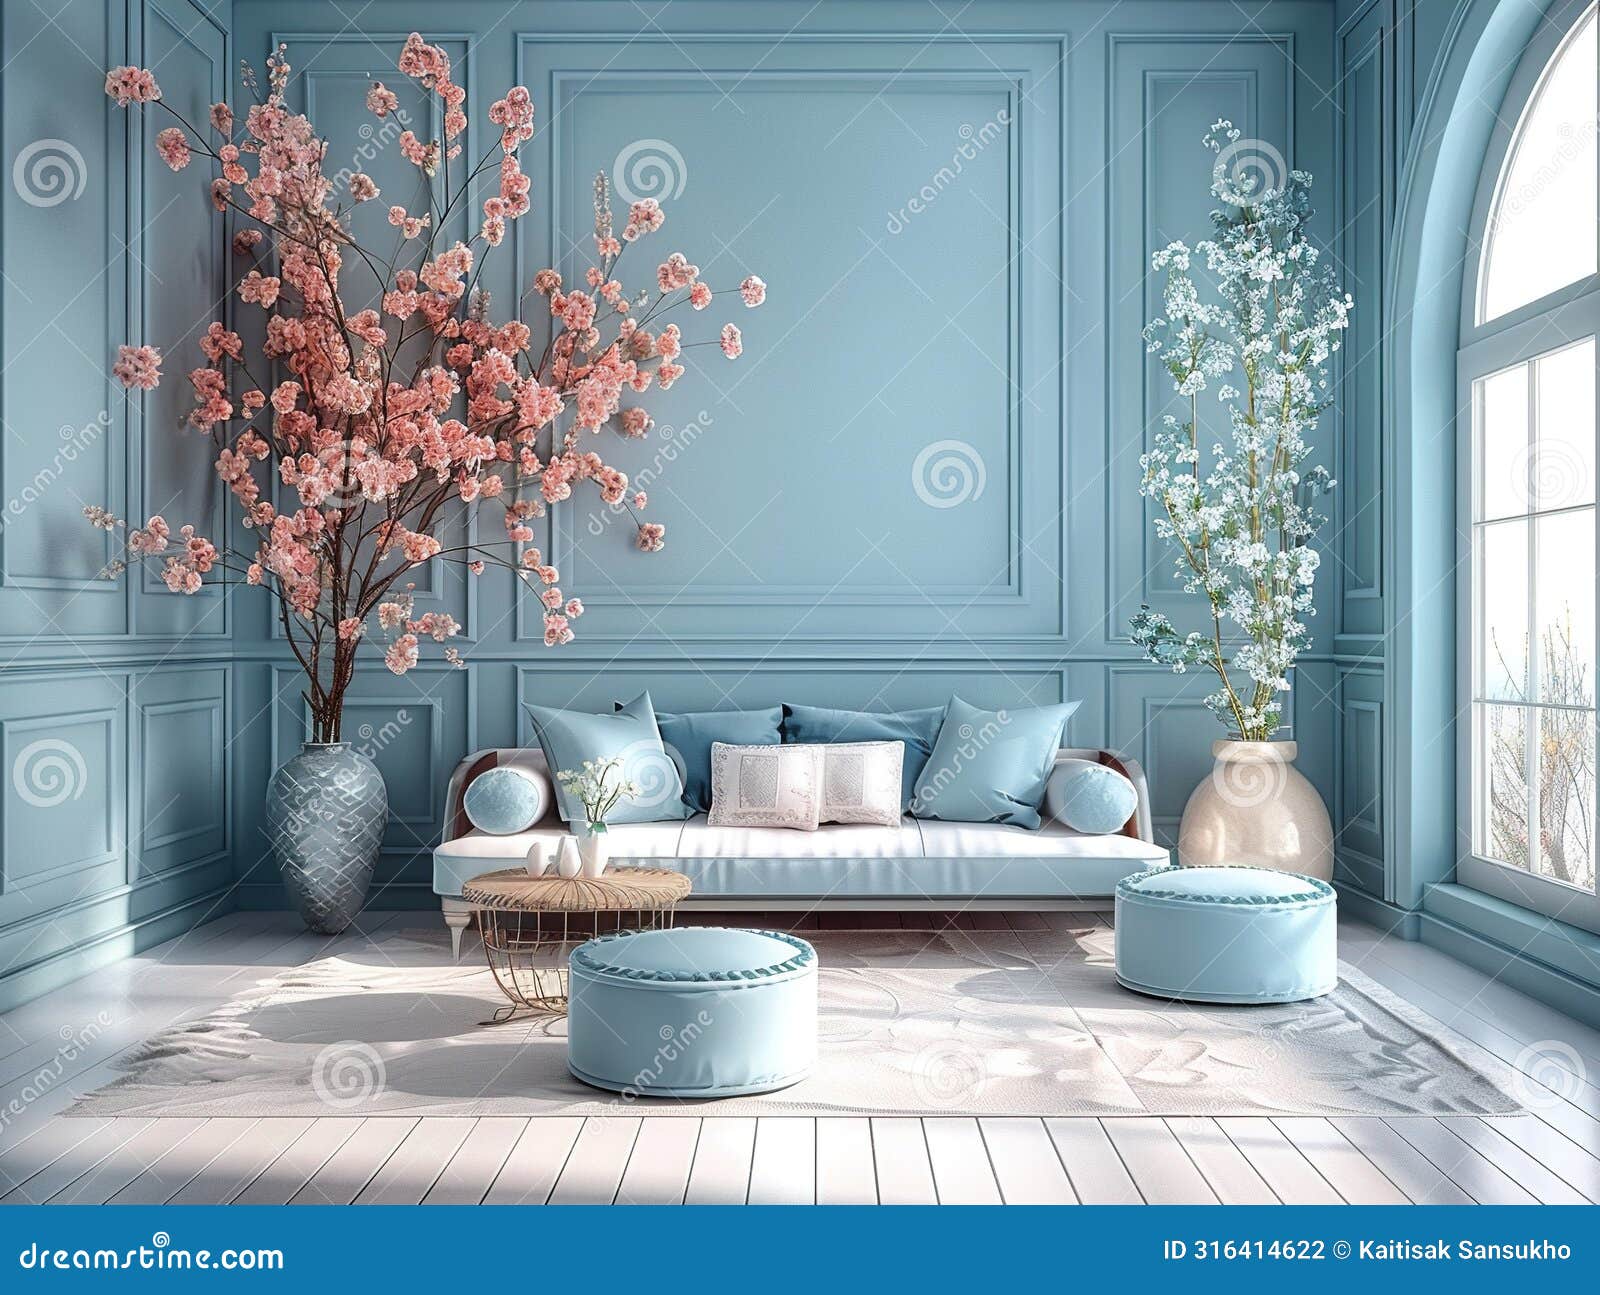 blue and pink pastel living room interior with sofa, poufs, and cherry blossom trees in vases